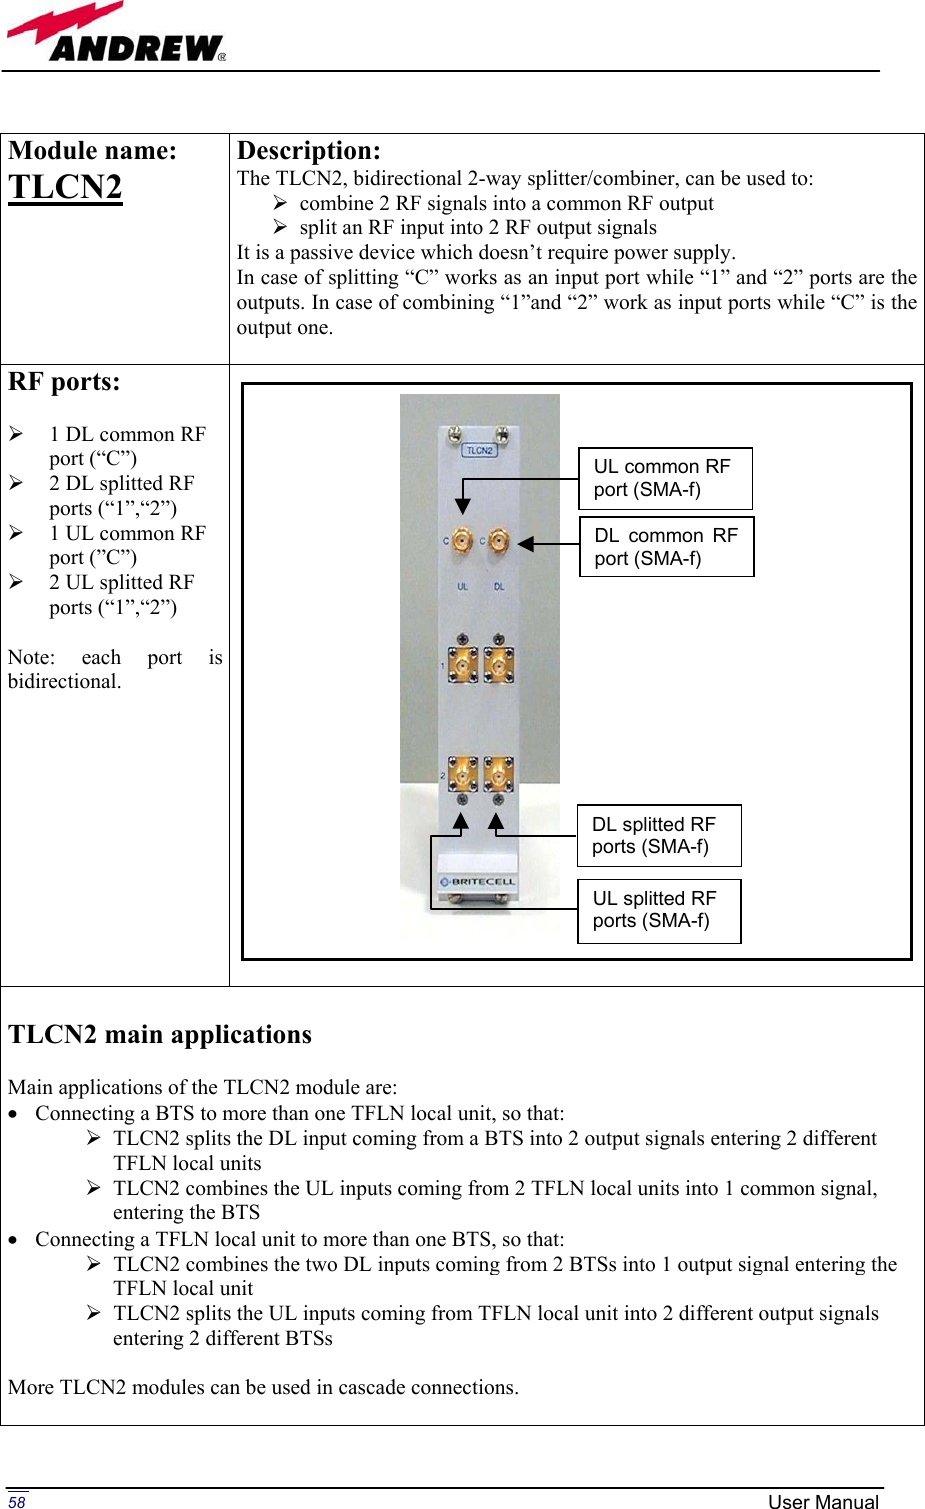 Page 58 of Andrew Wireless Innovations Group BCP-TFAM23 Model TFAM23 Downlink Booster User Manual MN024 04 rev3